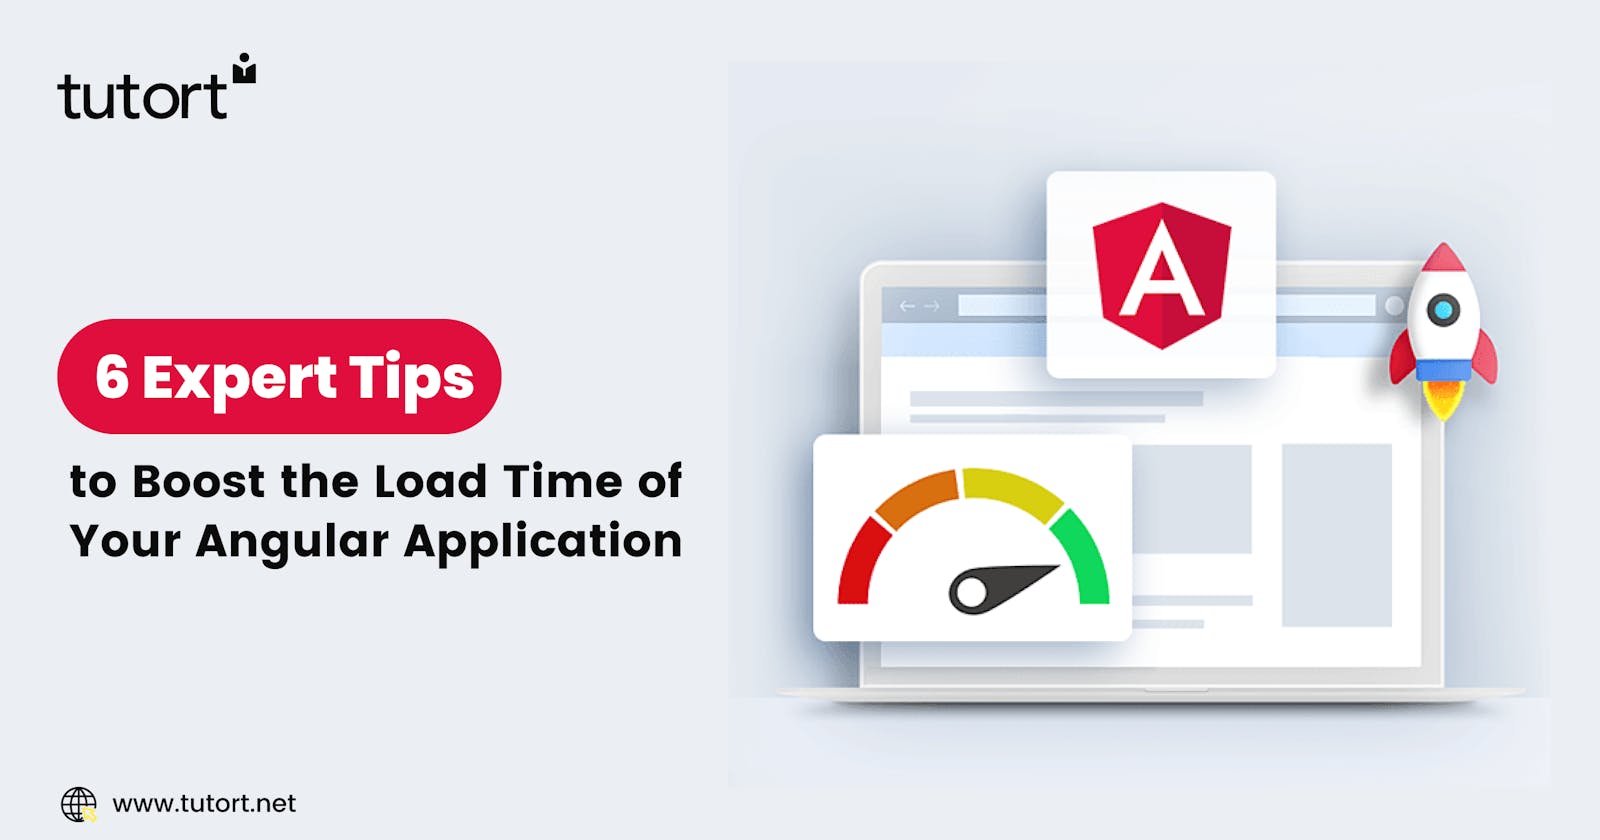 6 Expert Tips to Boost the Load Time of Your Angular Application